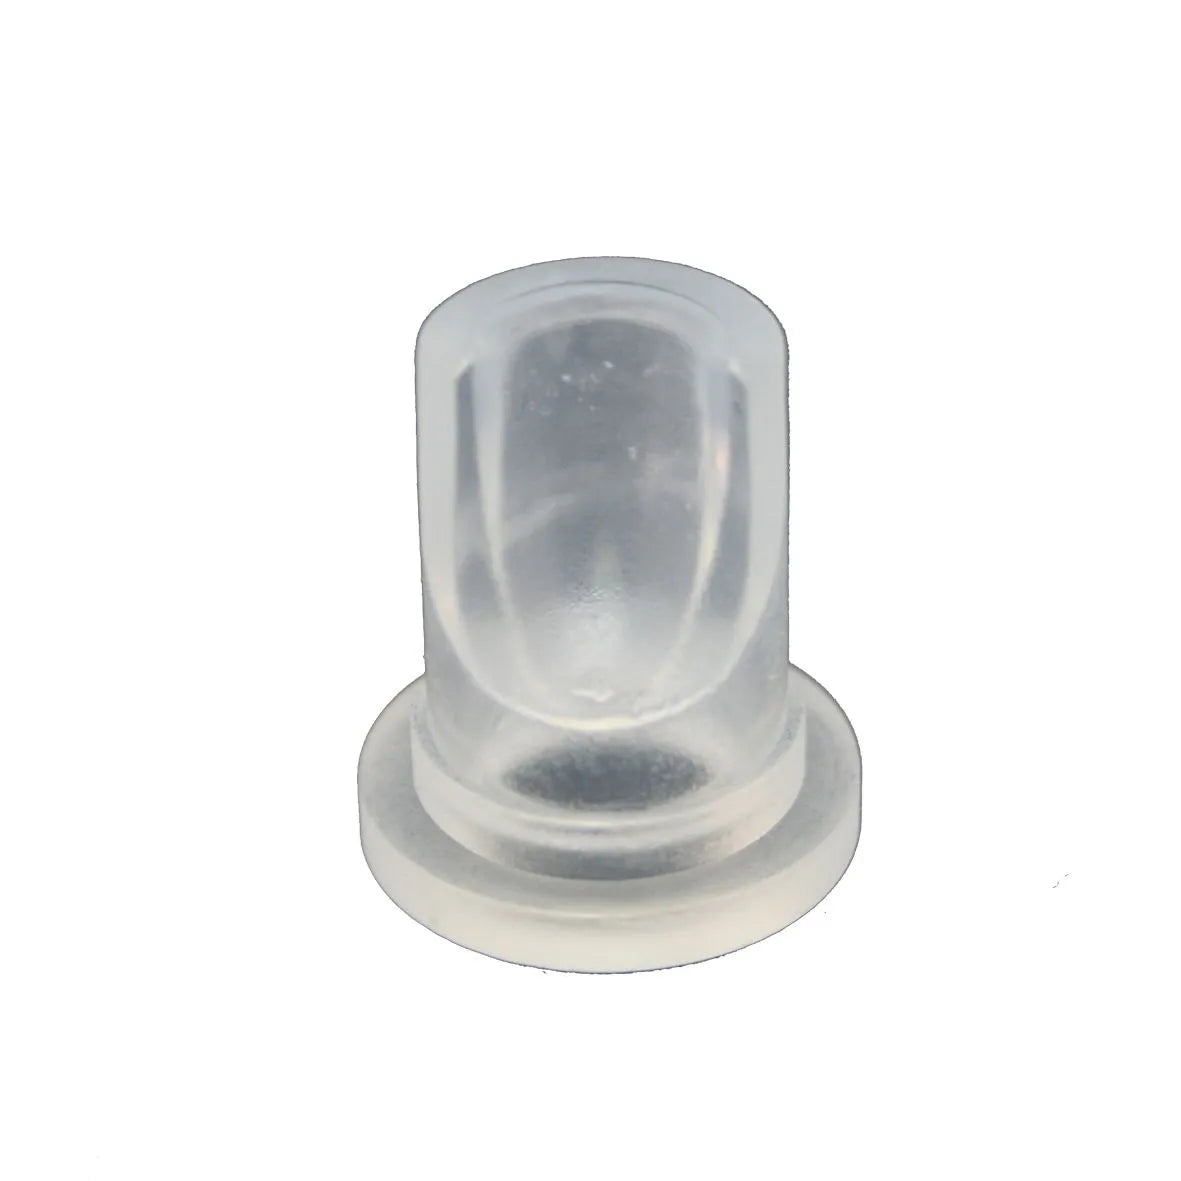 KEG0515 GAS NRV CLEAR LIP WITH FLANGE